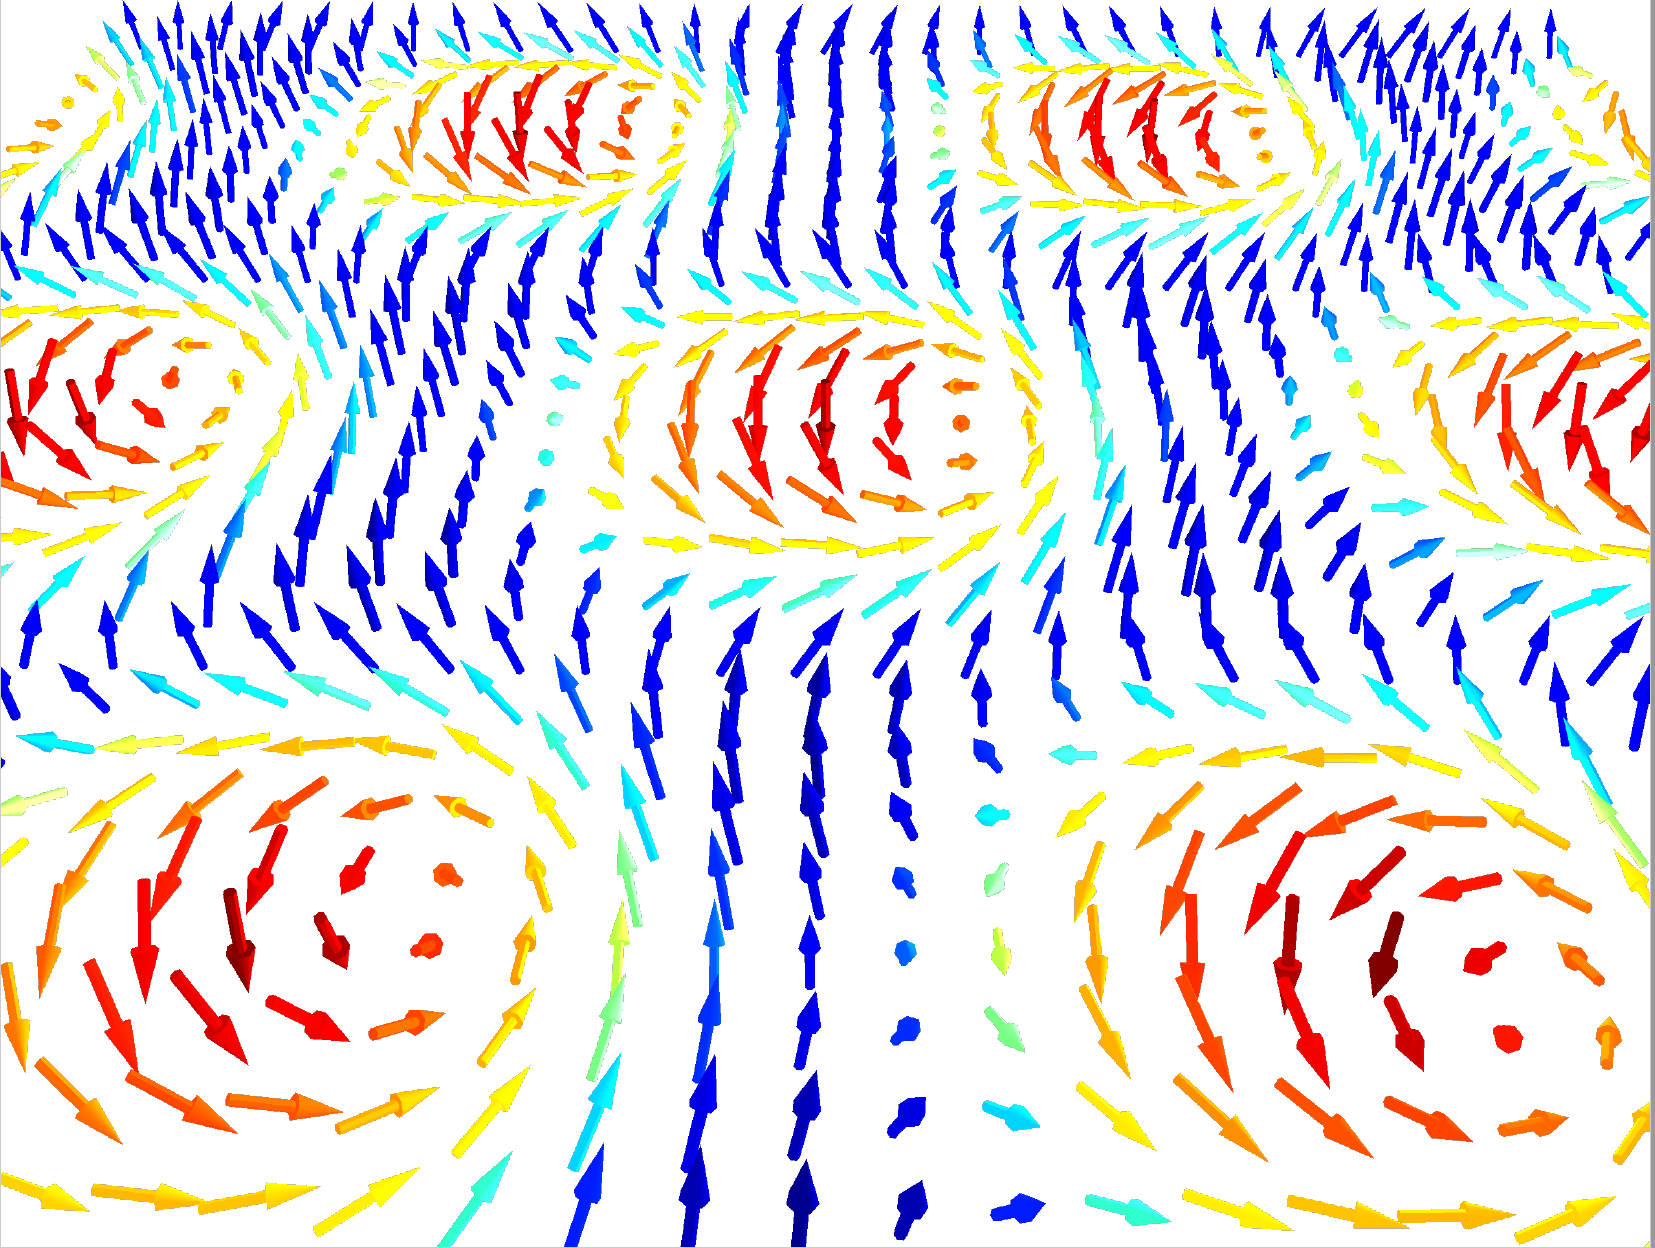 At low enough temperatures and sufficient applied magnetic fields, the spins in manganese silicide (MnSi) form a so-called skrymion lattice, which is an ordered arrangement of Bloch-type skyrmions with hexagonal symmetry.